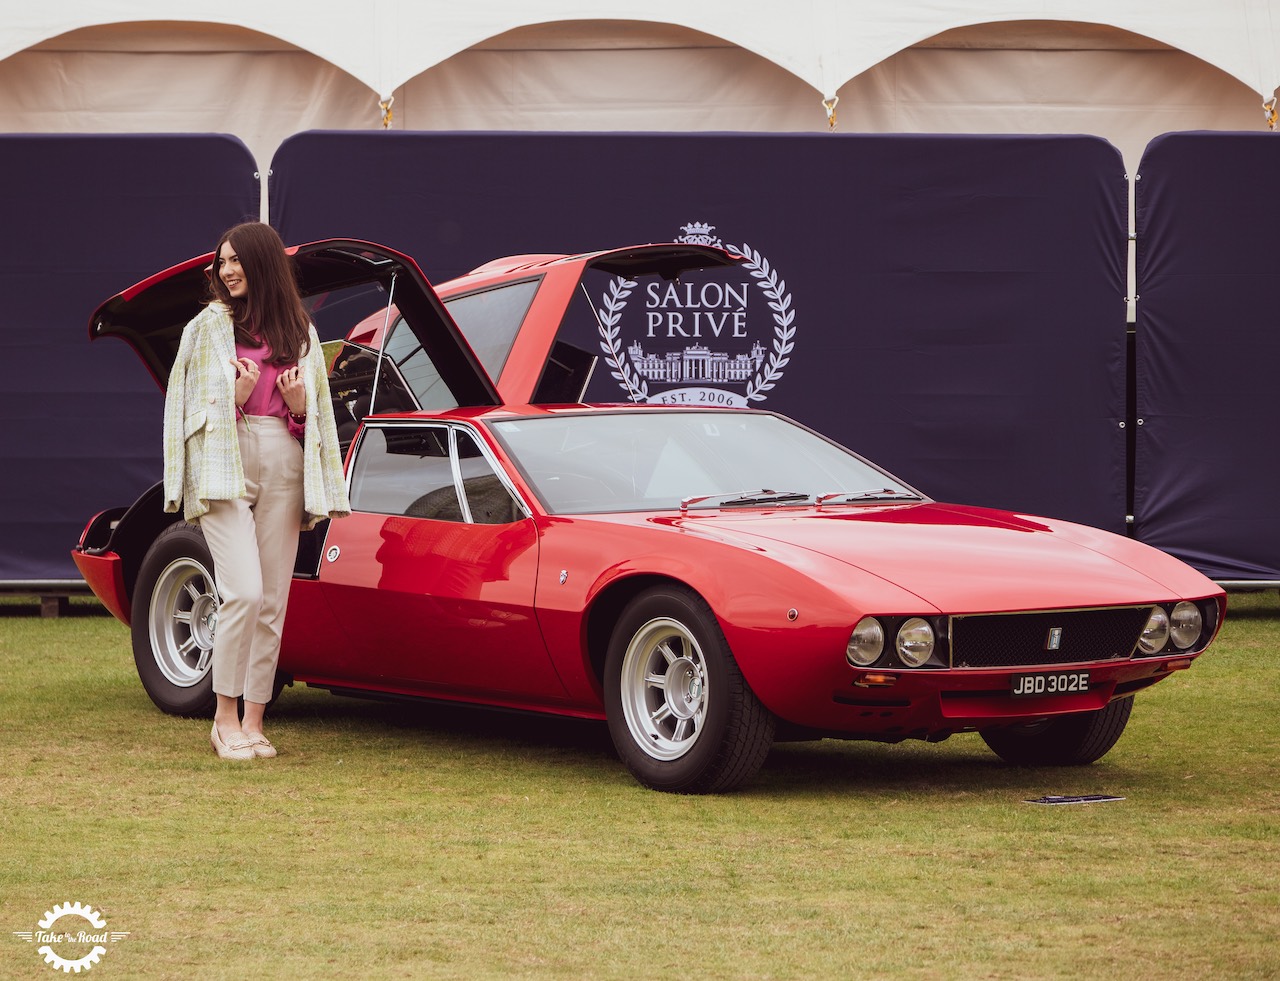 Worlds greatest cars to go on display at Salon Privé London